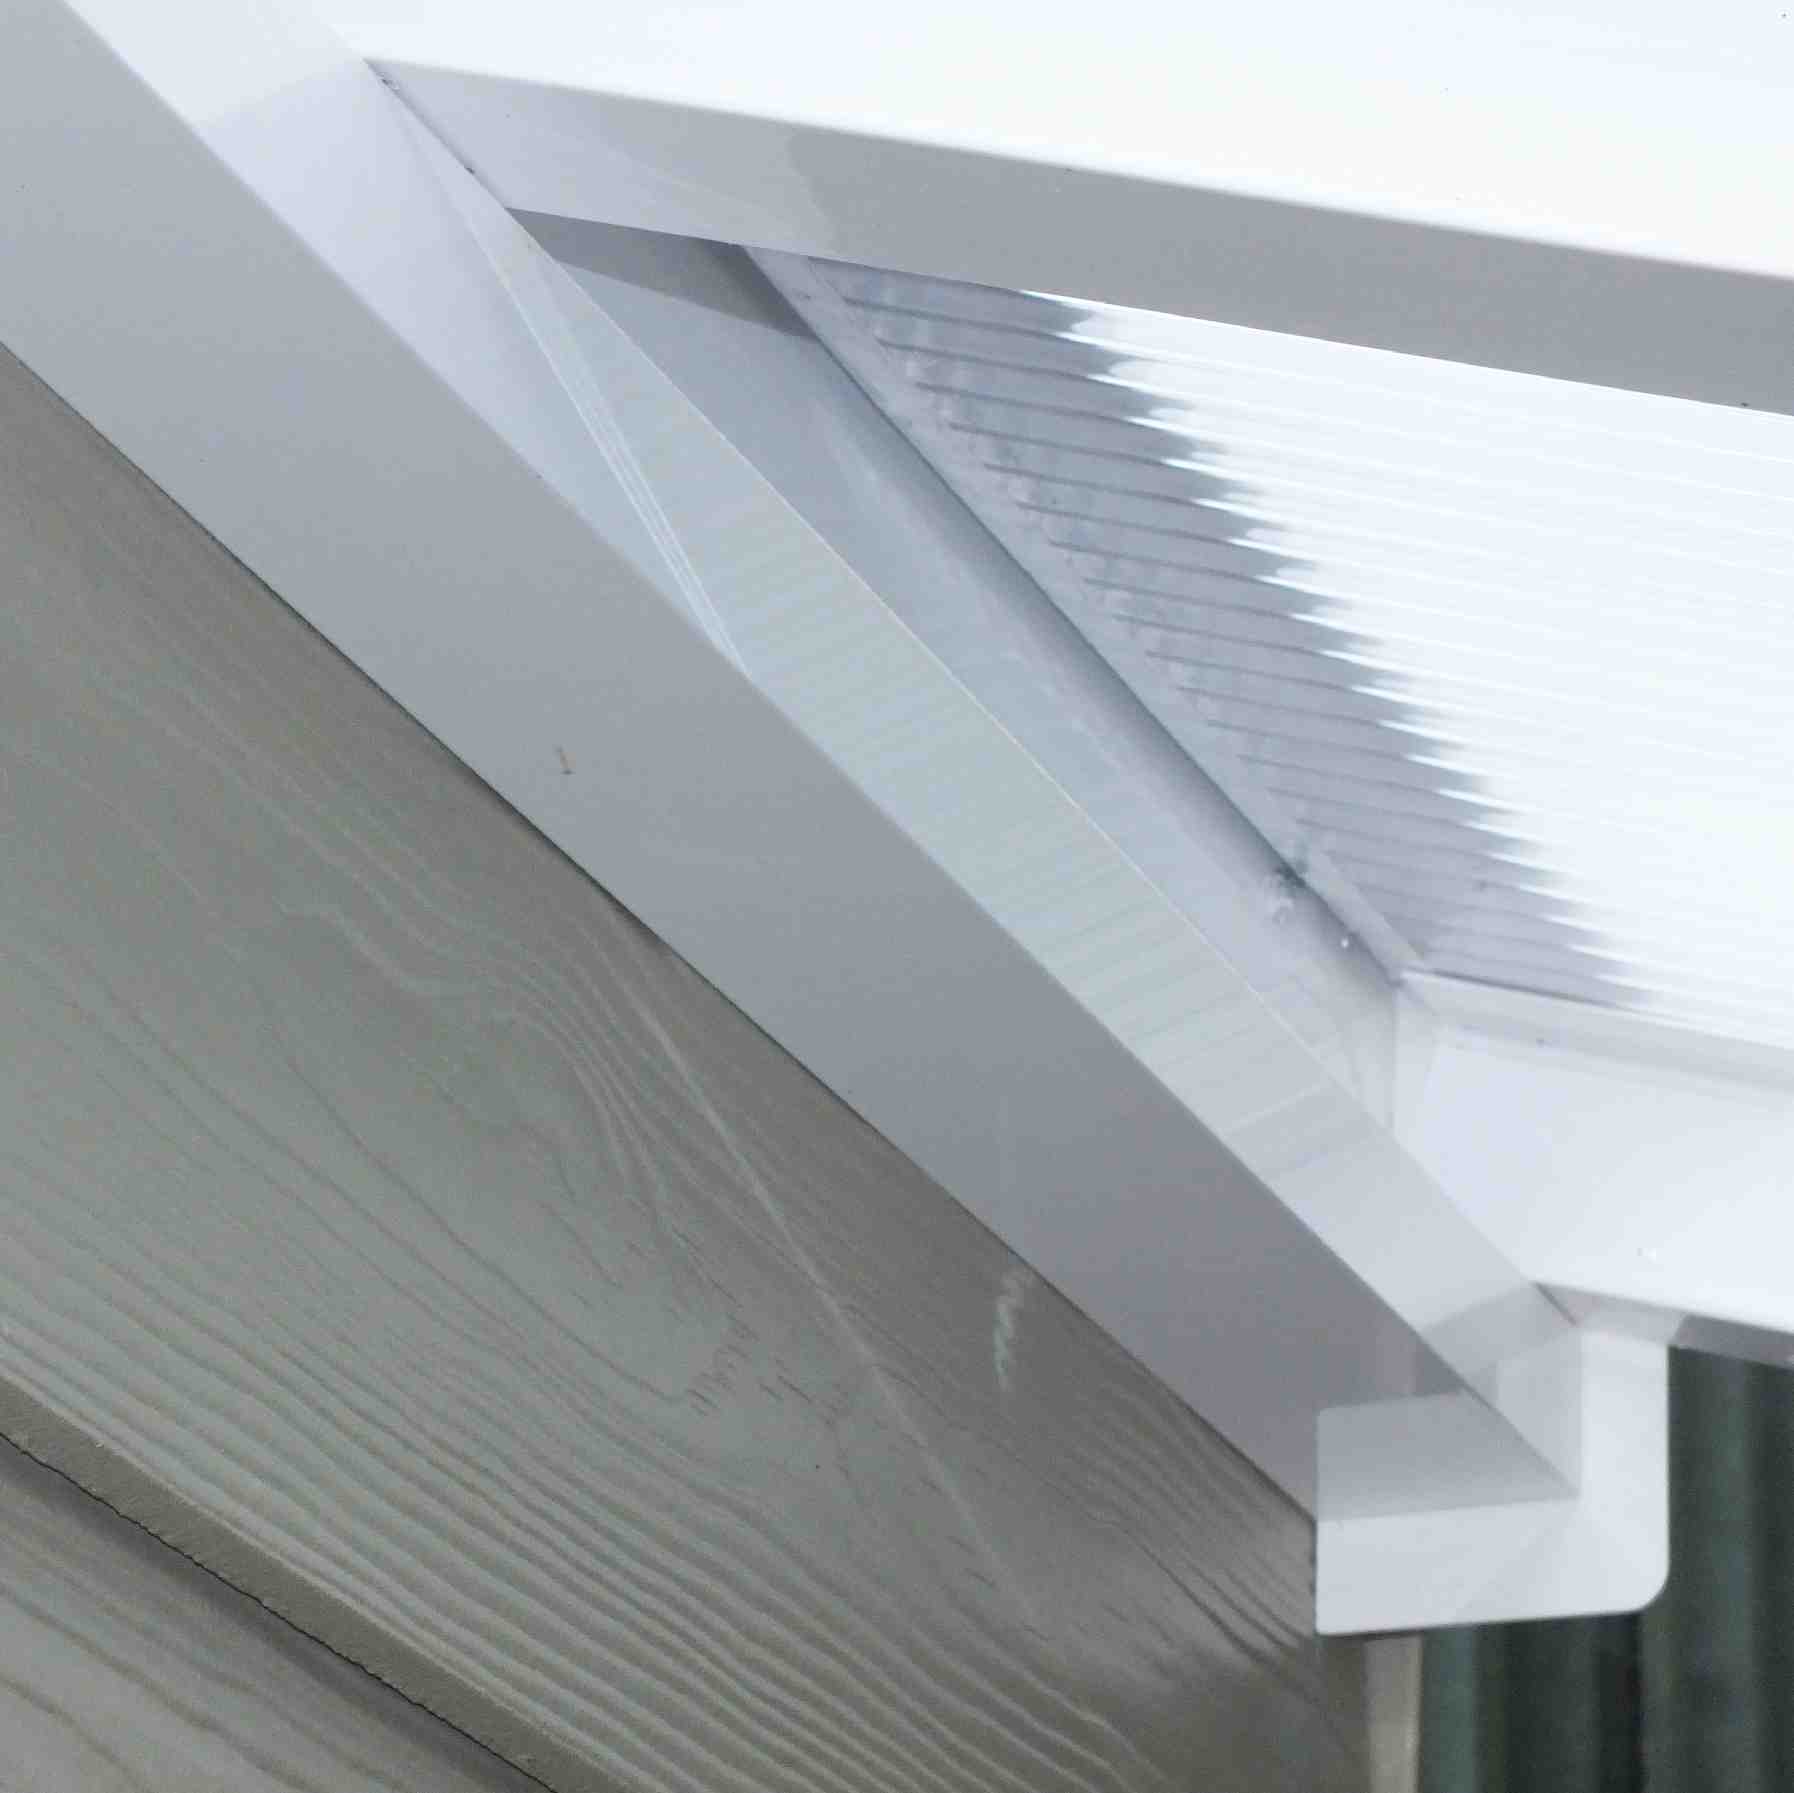 Great deals on Omega Verandah White with 16mm Polycarbonate Glazing - 10.6m (W) x 3.5m (P), (5) Supporting Posts